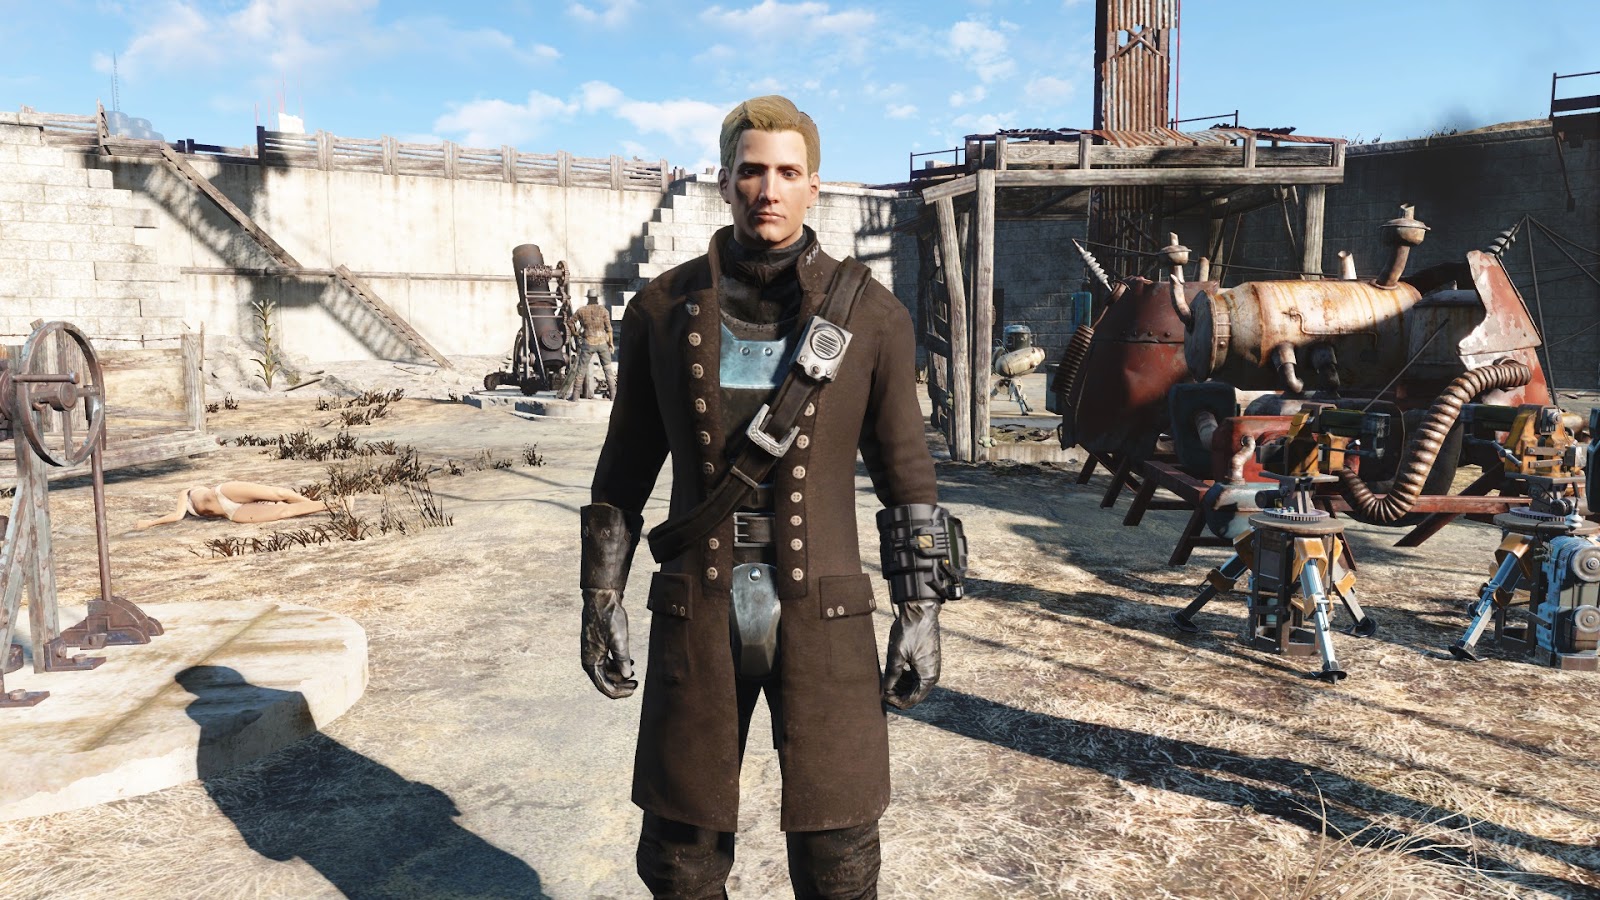 Minuteman watchtowers fallout 4 фото 81